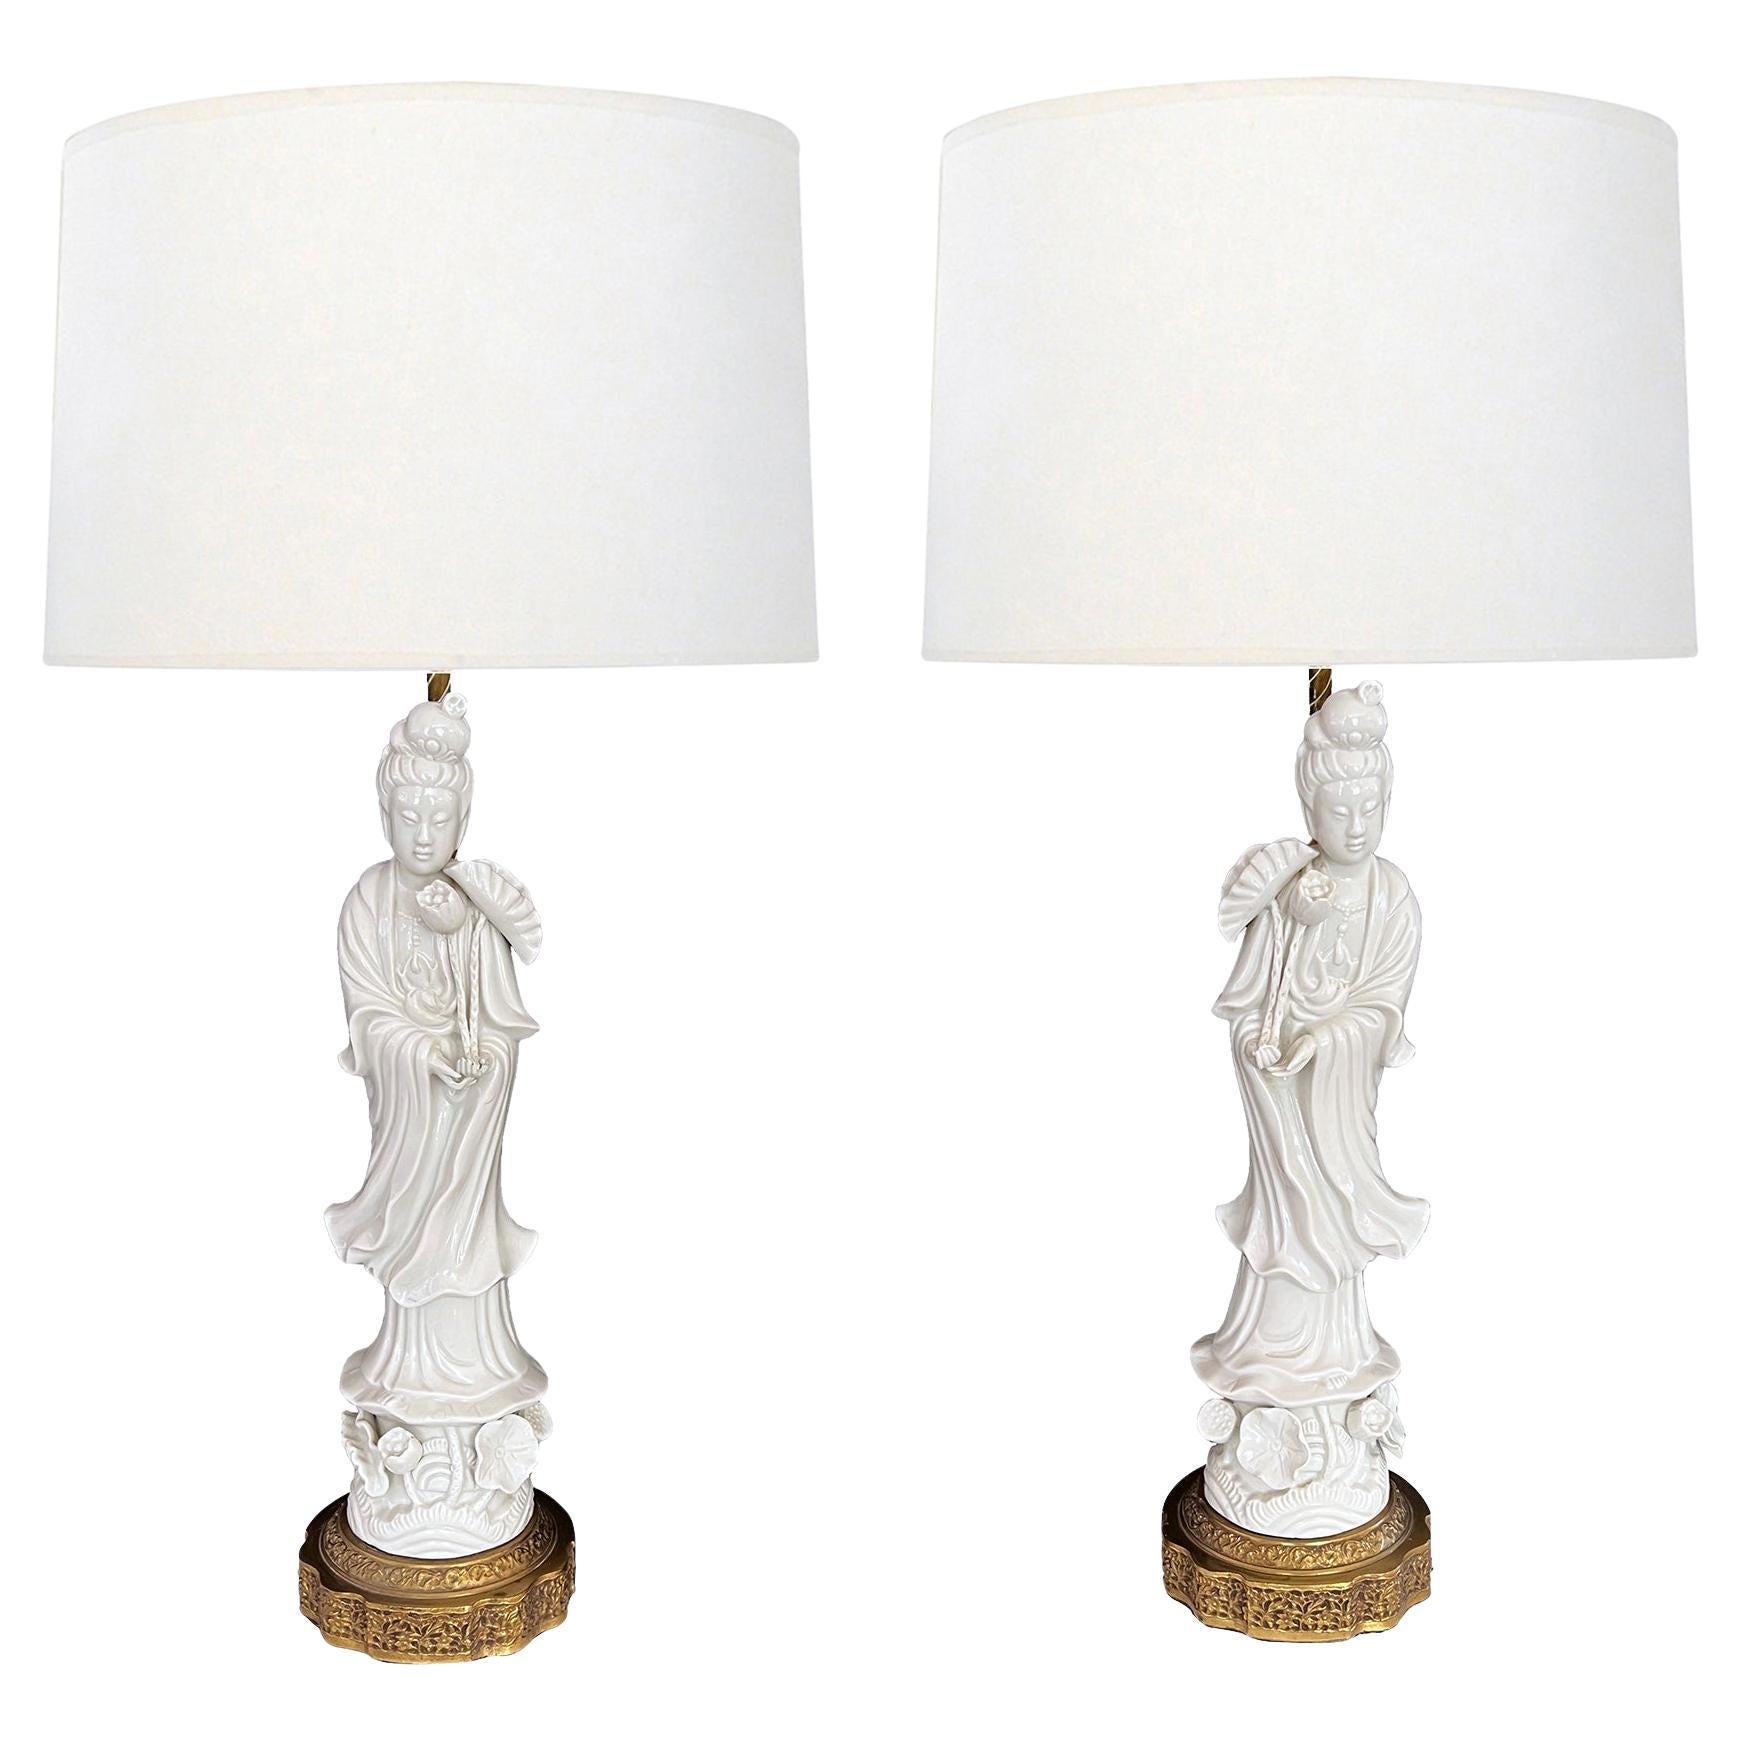 Pair of Chinese Porcelain Blanc De Chine Figural Lamps of the Goddess Guanyin